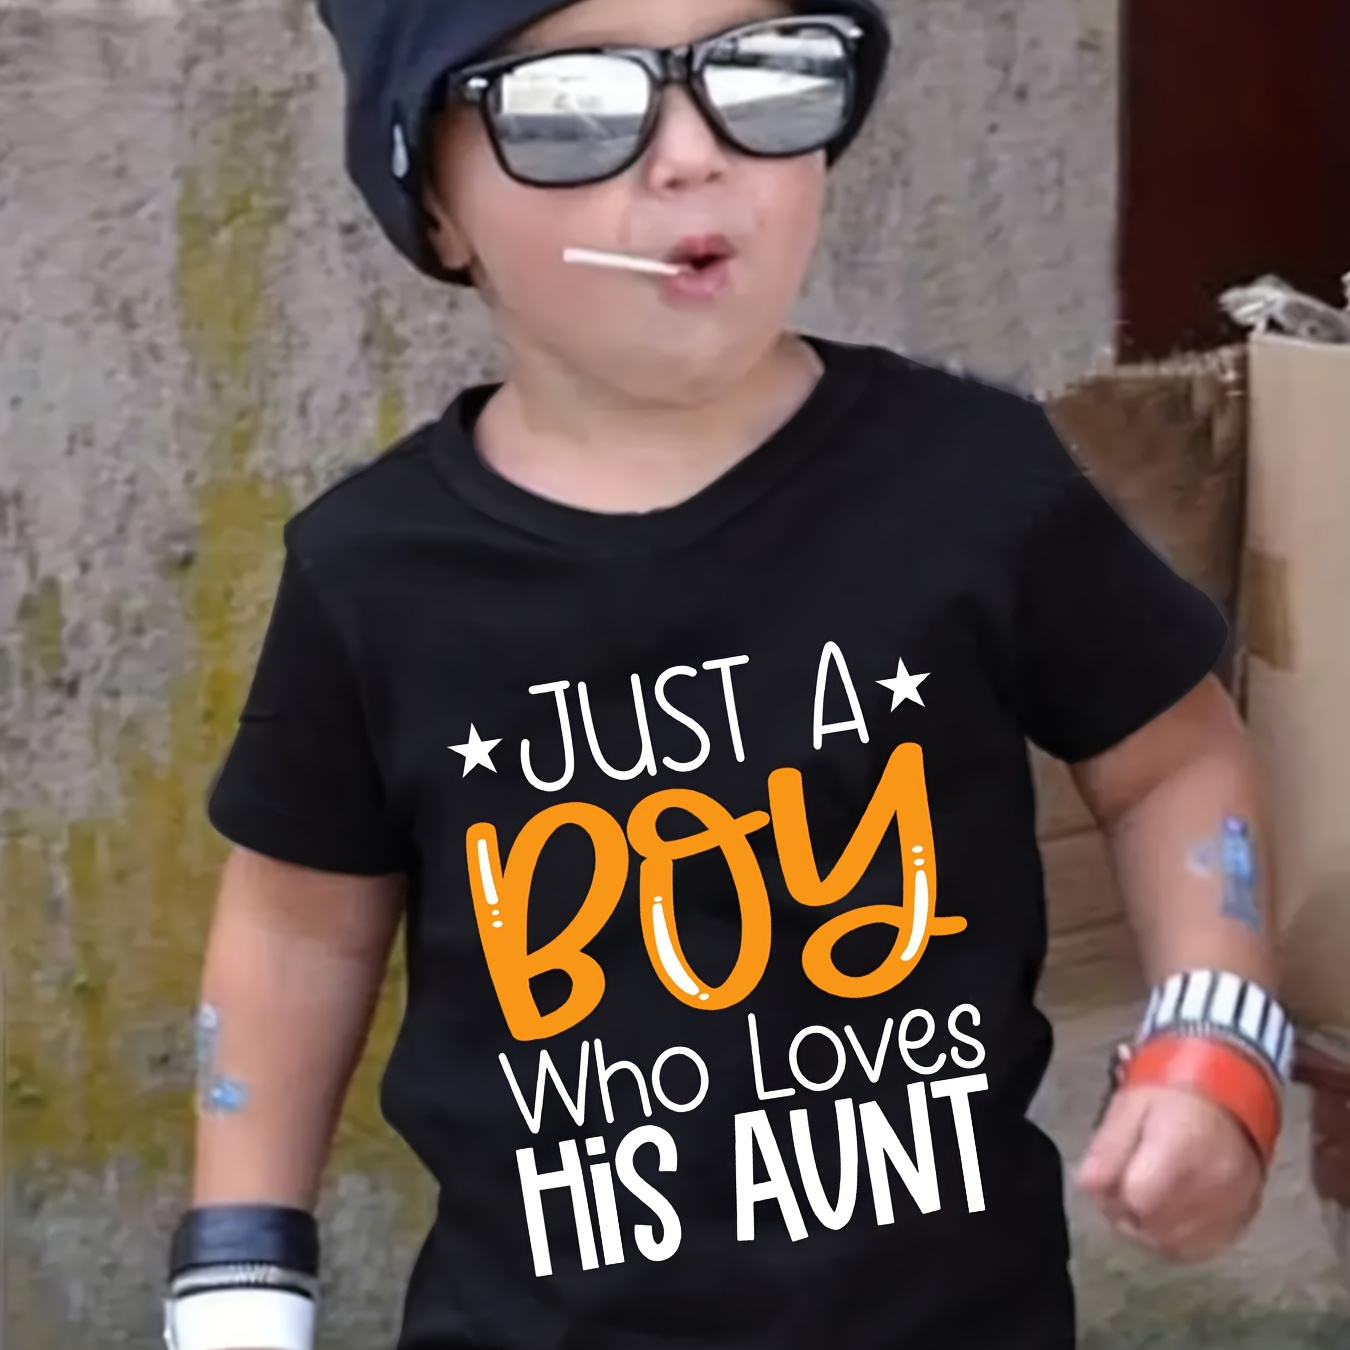 

Casual Comfy Boy's Summer Top - Just A Boy Who Loves His Aunt Print Short Sleeve Crew Neck T-shirt - Creative Tee As Gift